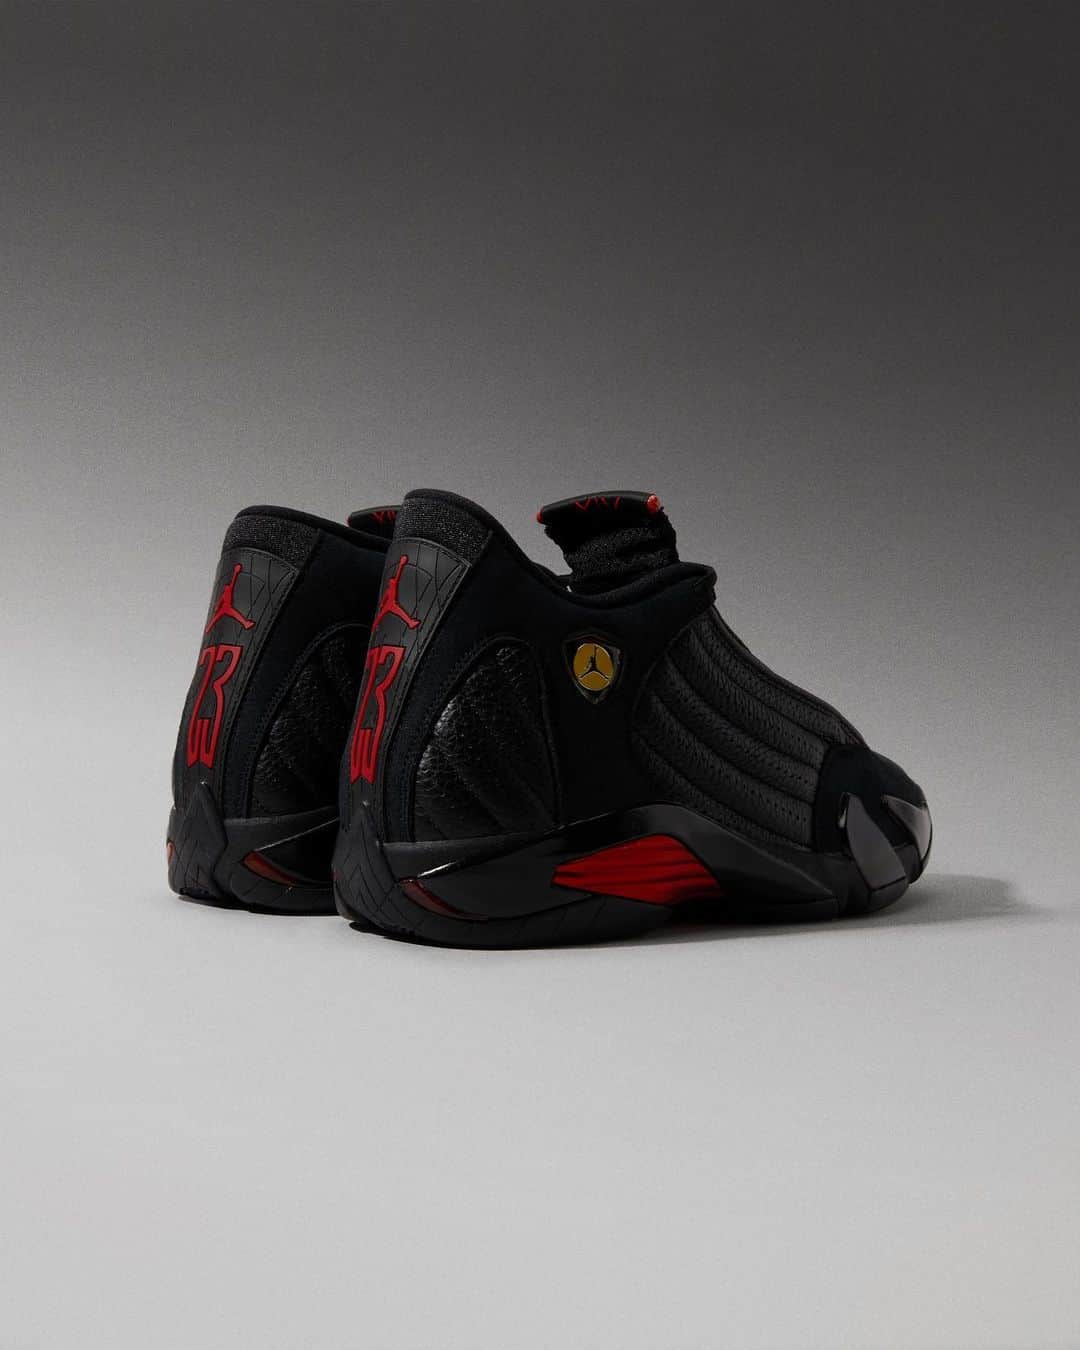 Flight Clubのインスタグラム：「Grand closing. Memorialized by MJ's game-winning jumper in Game 6 of the 1998 NBA Finals, the Air Jordan 14 Retro 'Last Shot' 2018 renews the historic colorway with OG elements intact. Sleek black leather meets Varsity Red detailing. The Ferrari-inspired Jumpman insignia emblazons the lateral side.」